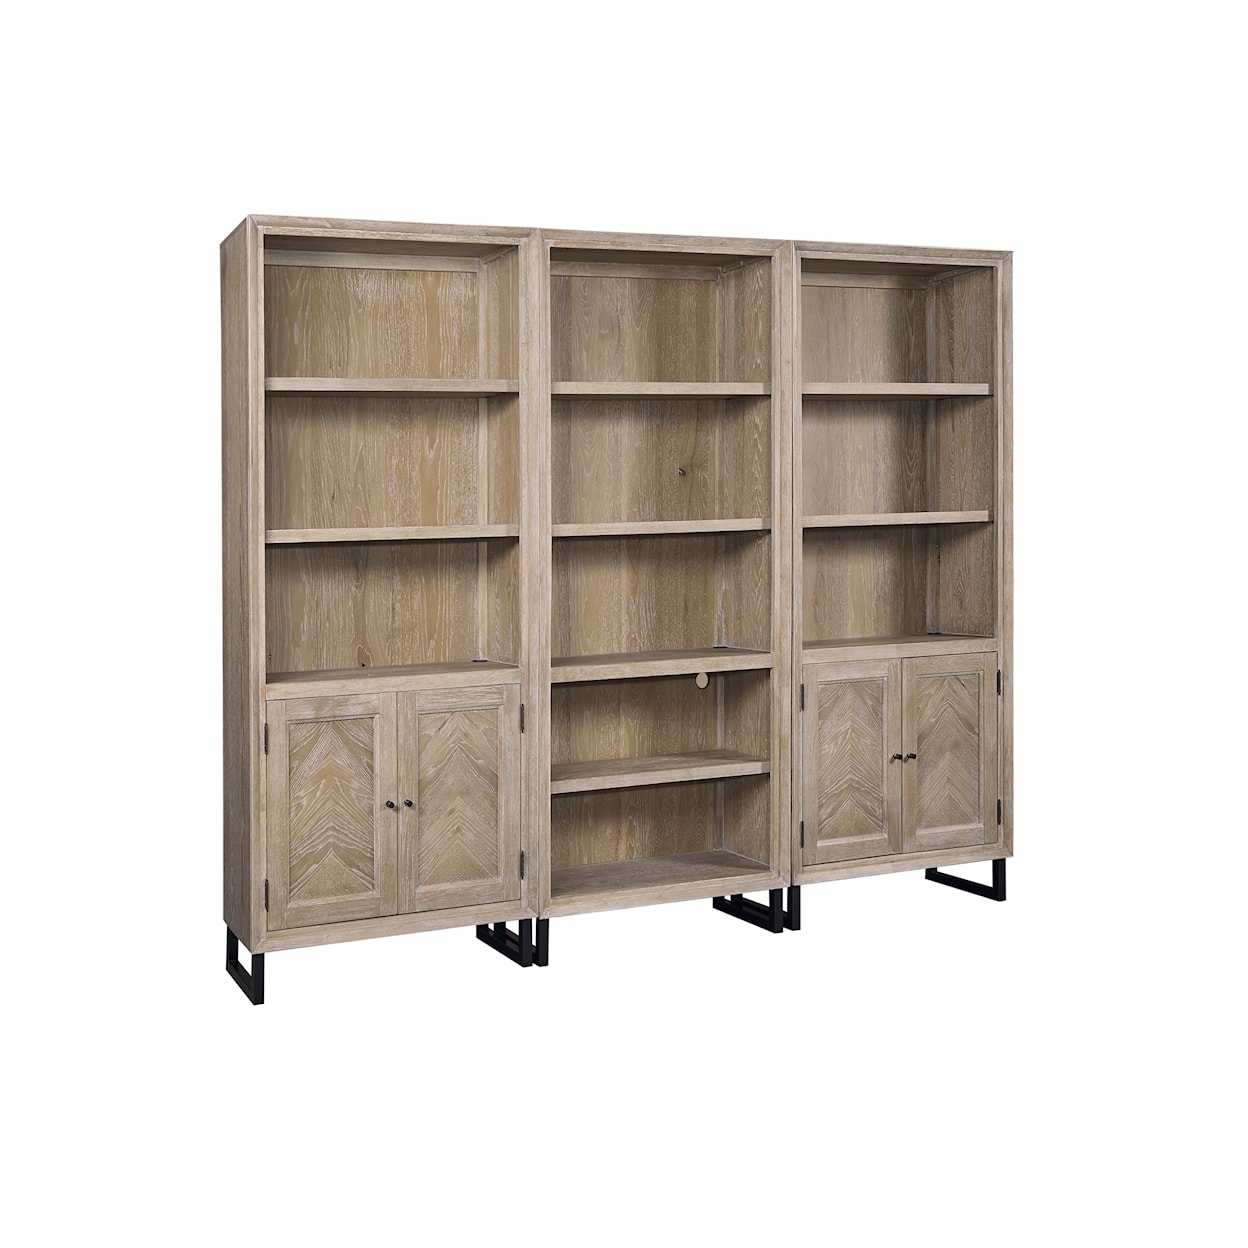 Aspenhome Harper Point Bookcase with Concealed Storage